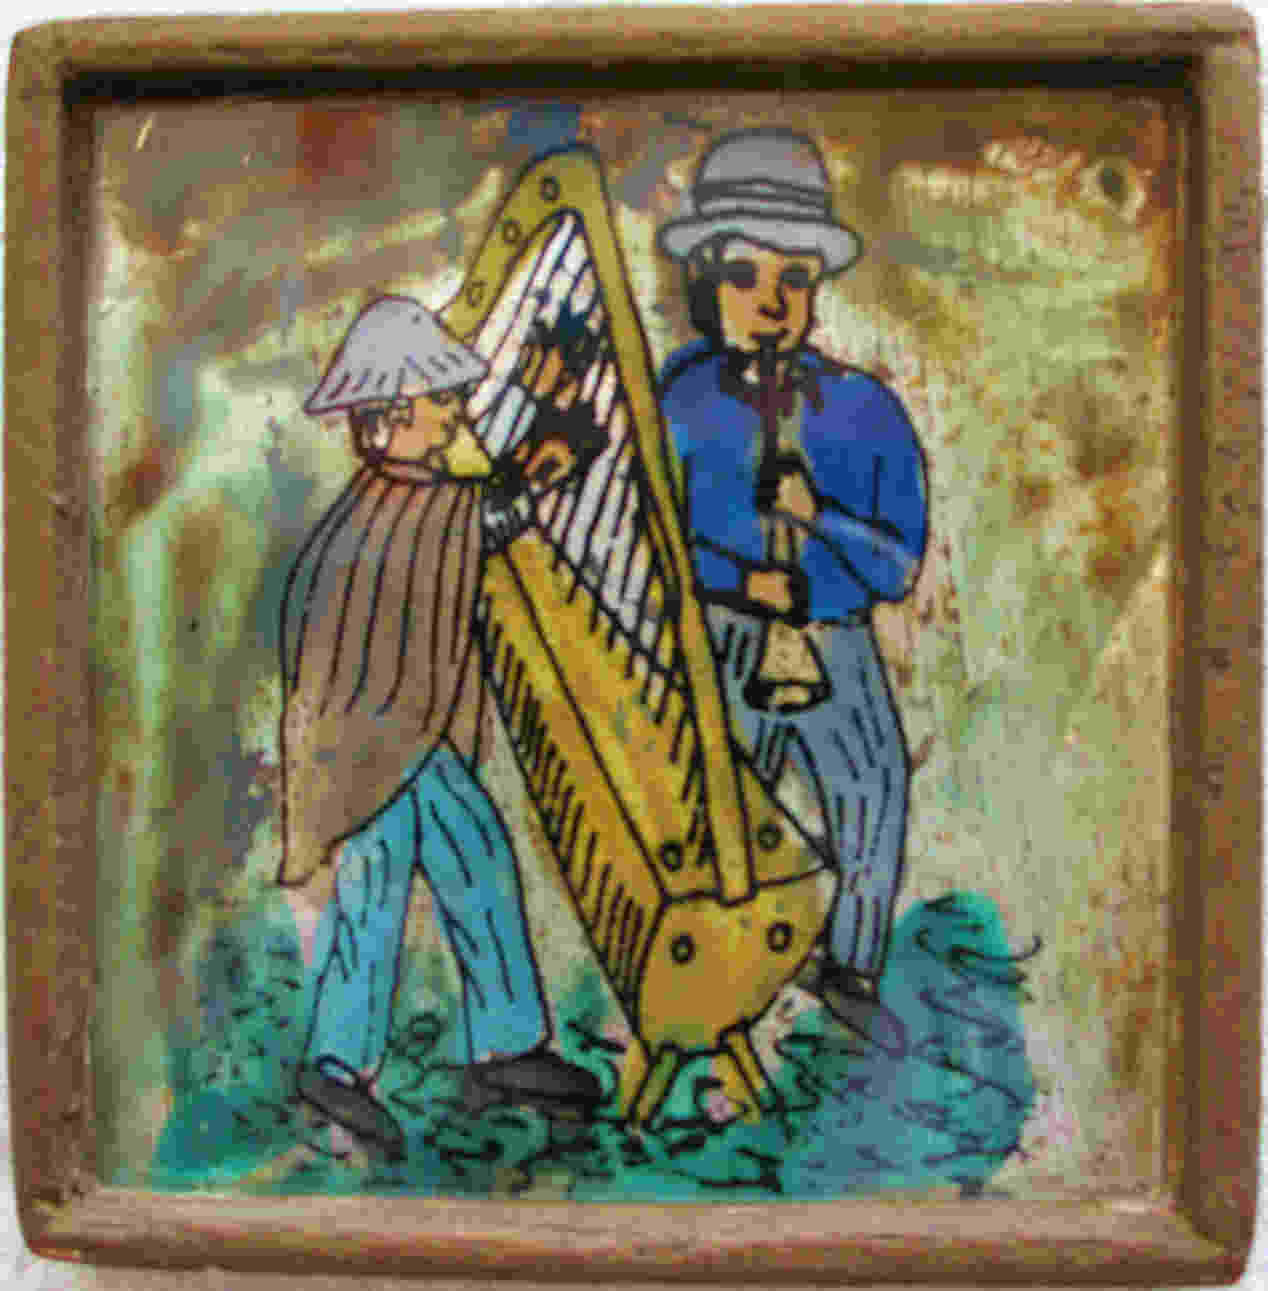 Painting on glass from Peru